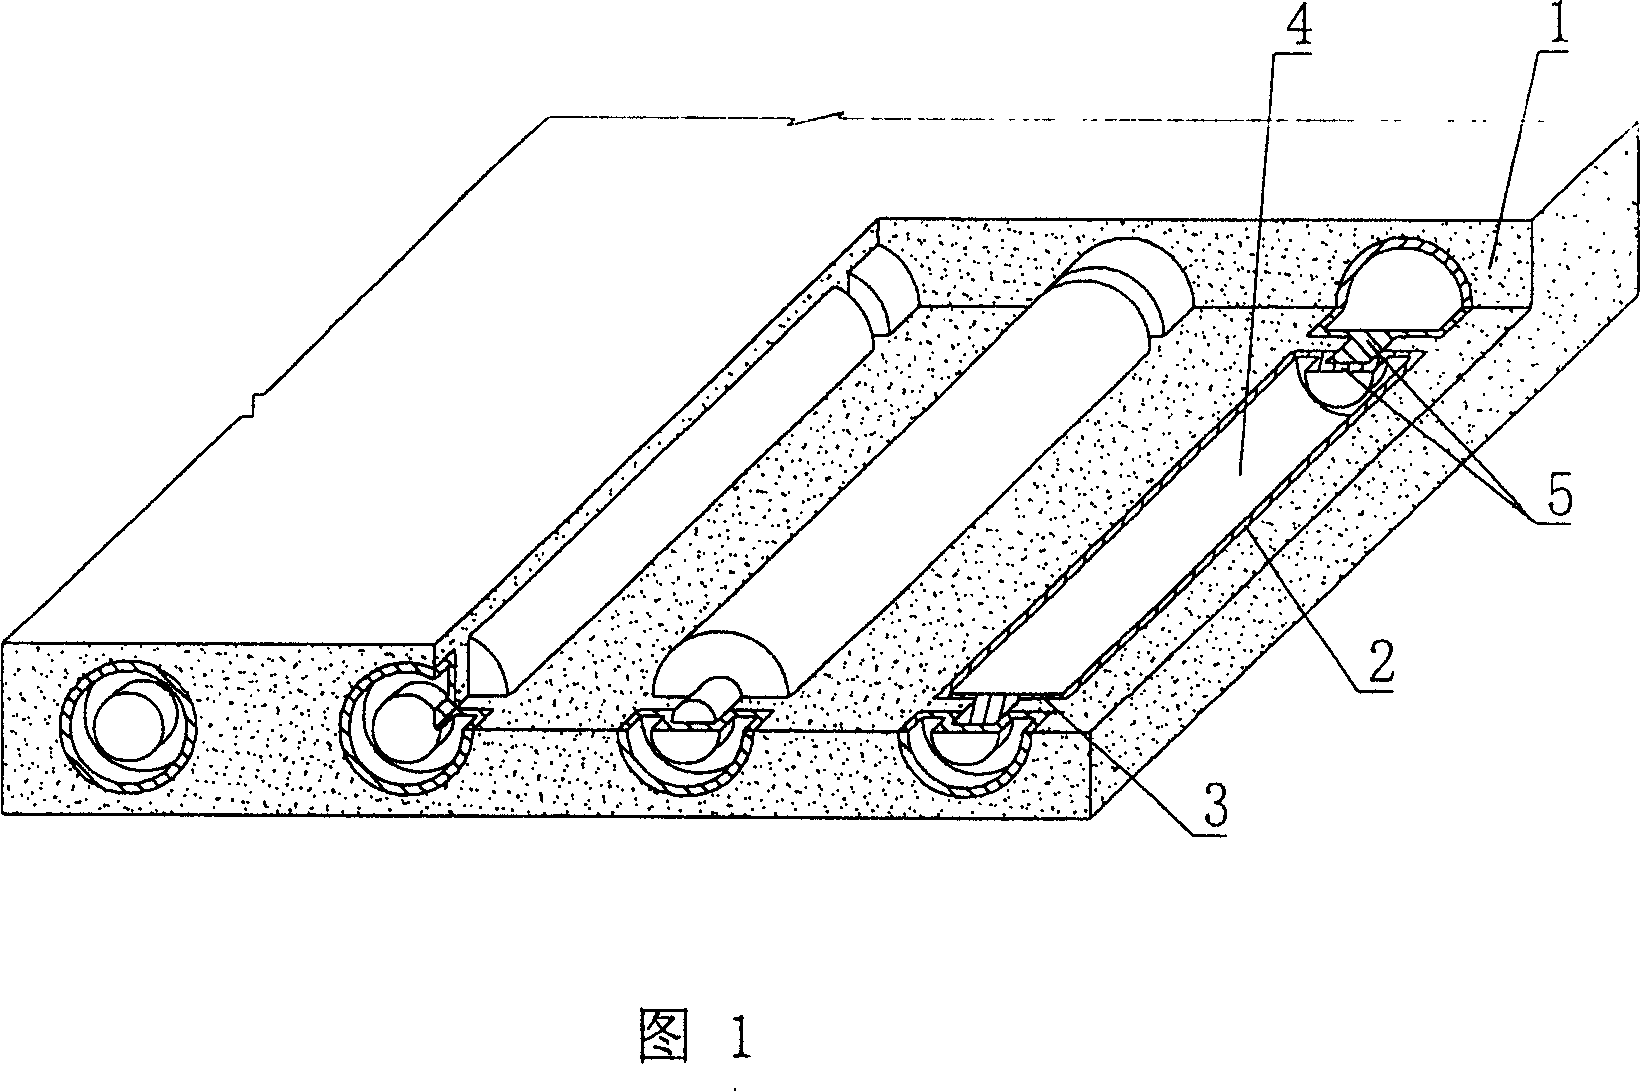 Hollow build cover of cast-in-situ reinforcing steel bar concrete